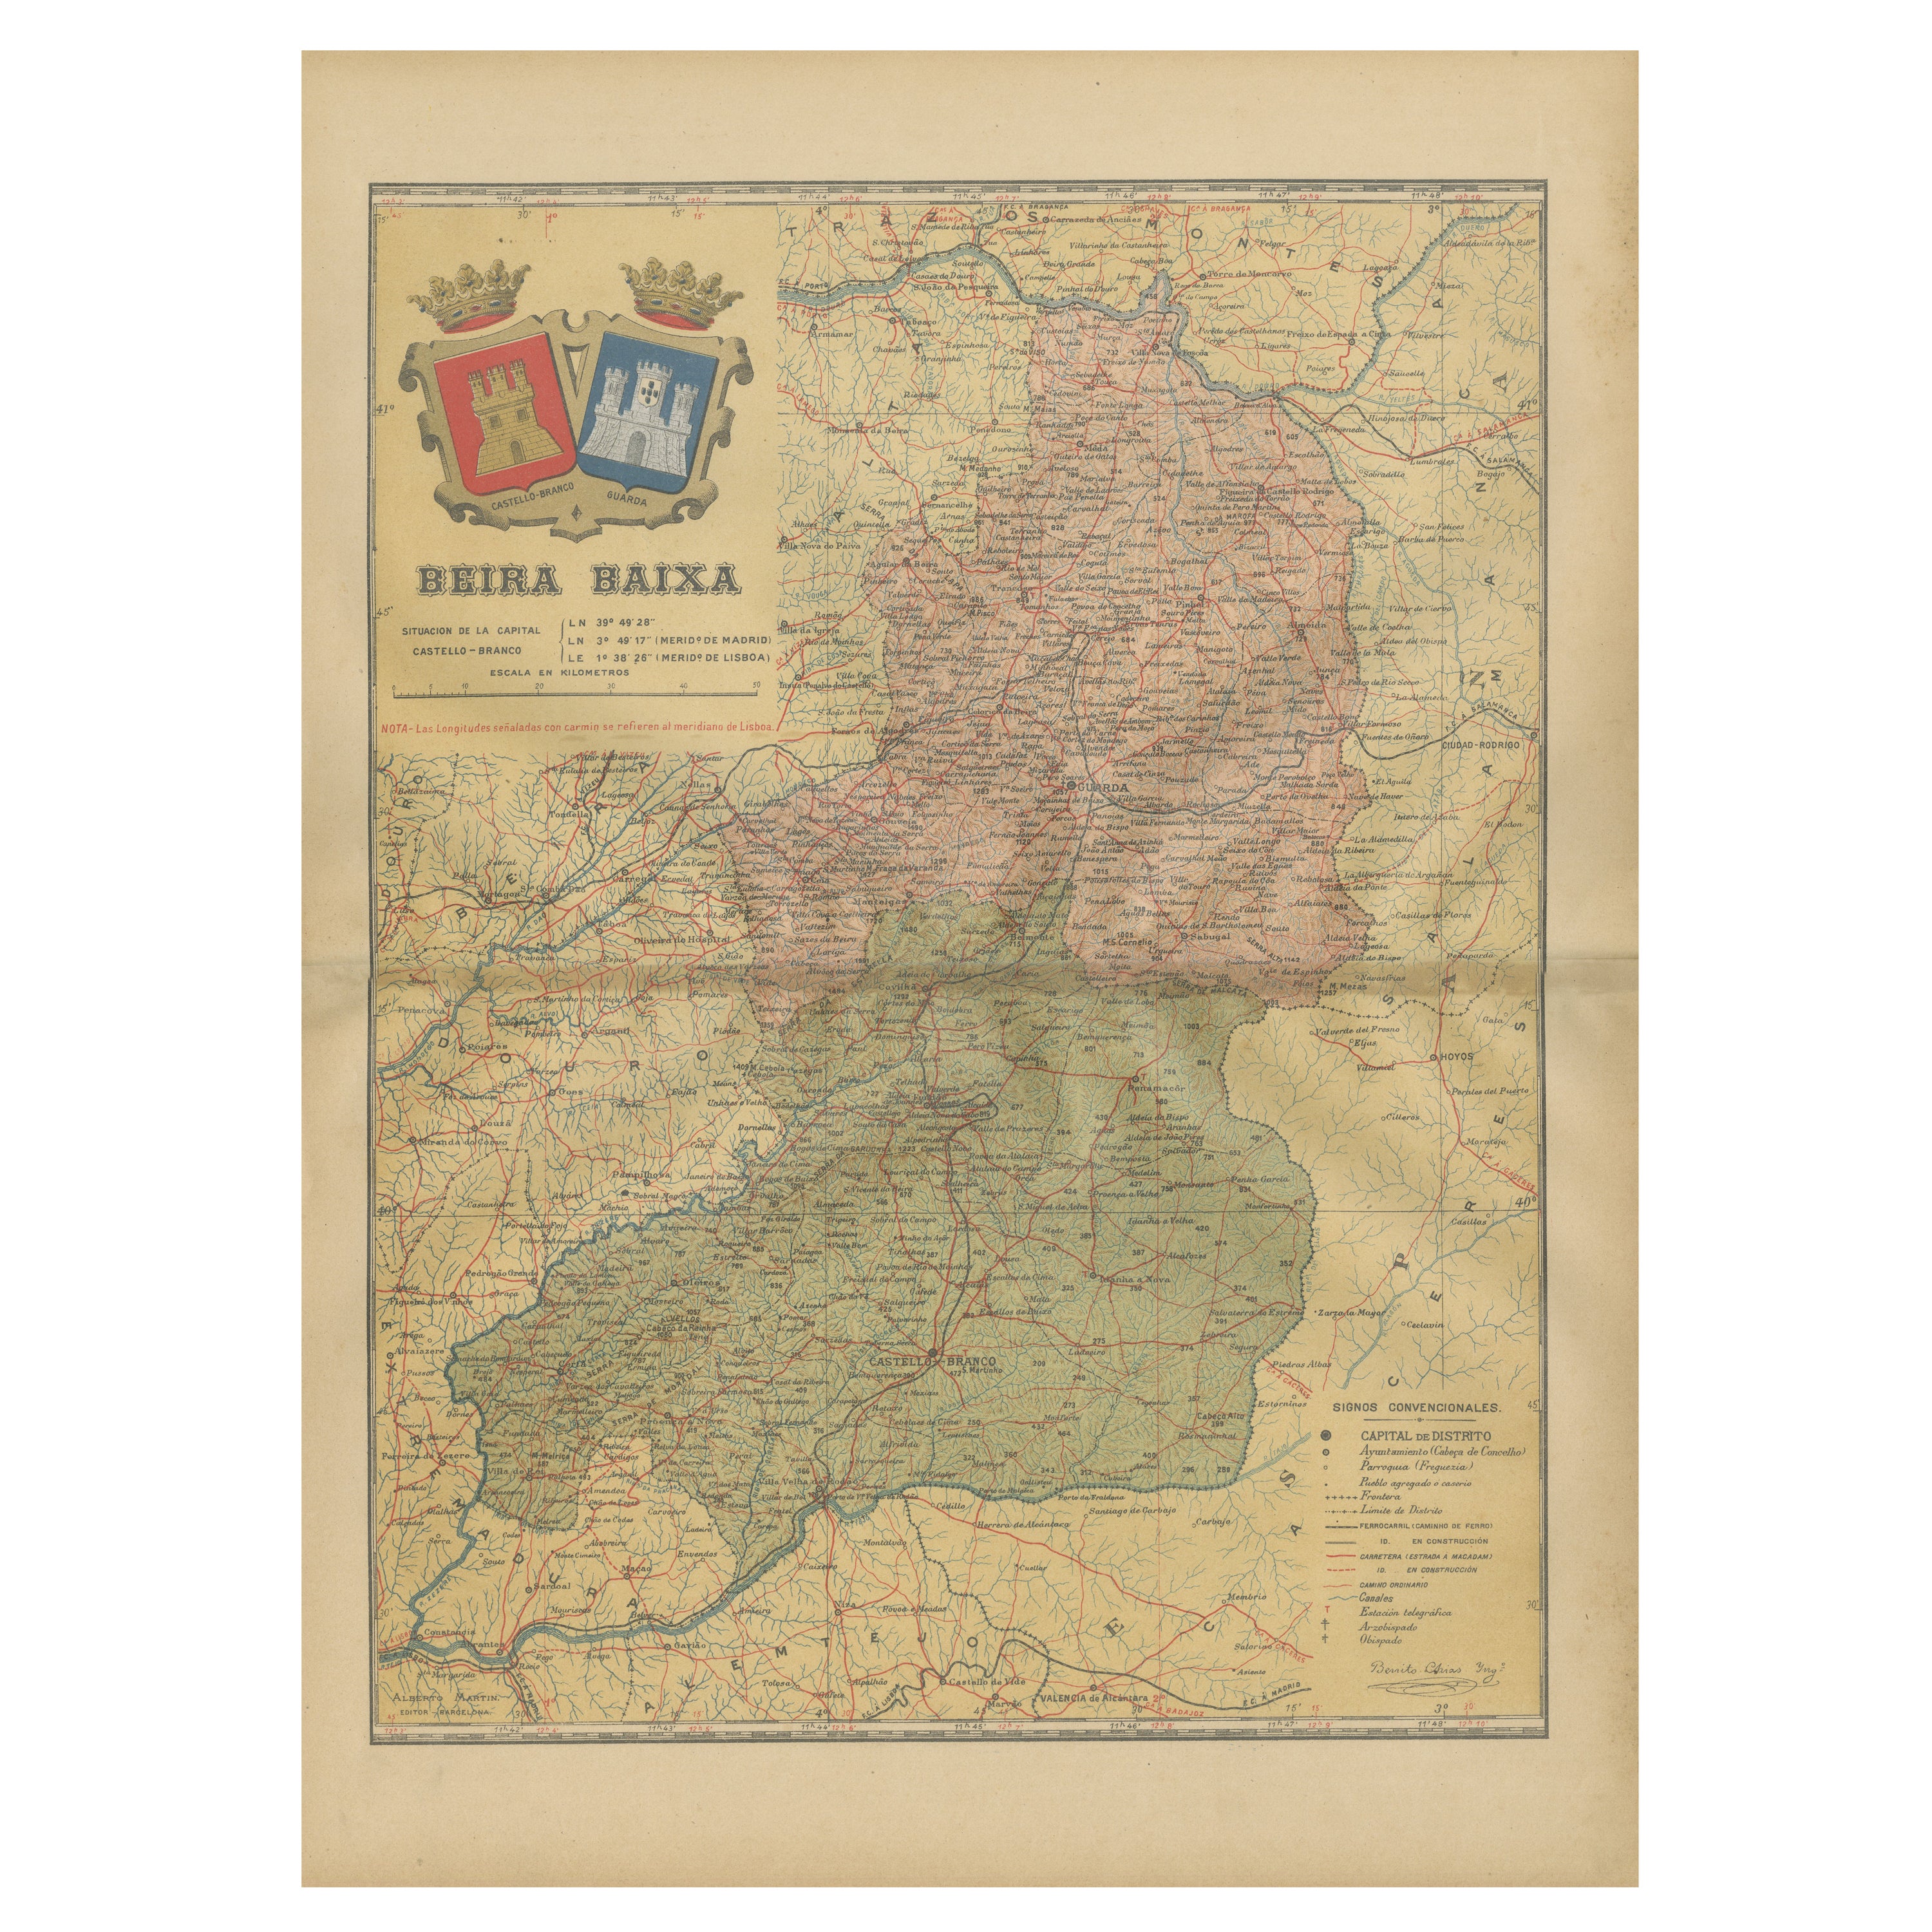 Beira Baixa: A Cartographic Portrait of Portugal's Historic Frontier in 1903 For Sale